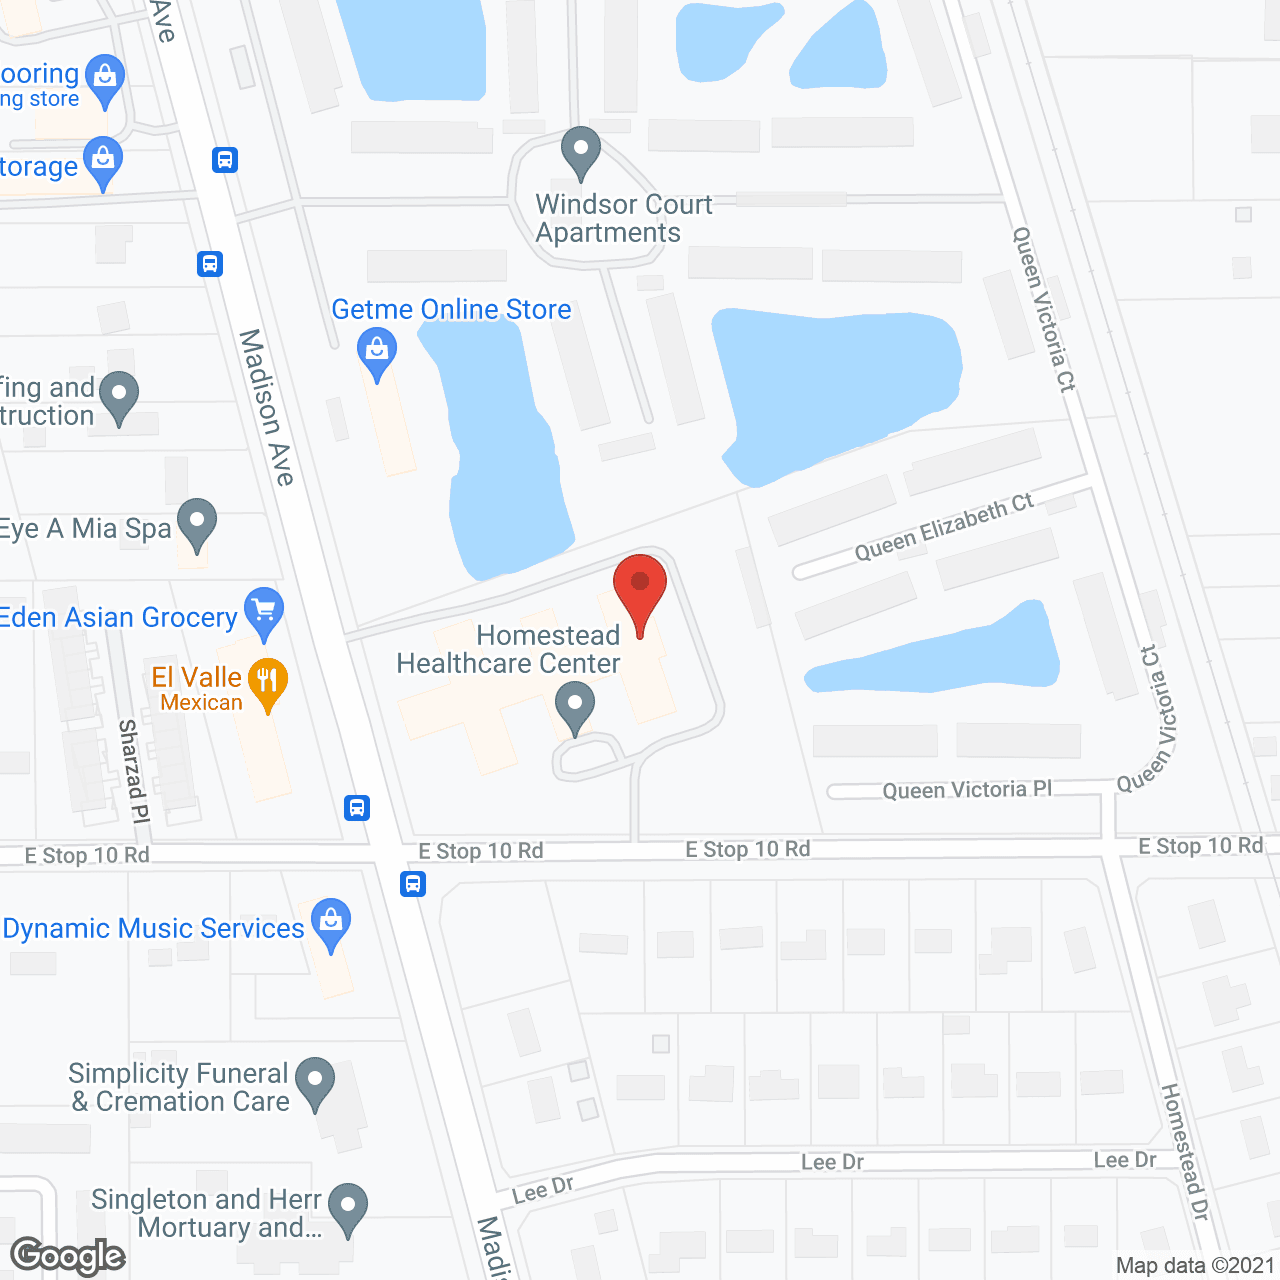 Madison Health Care Center in google map